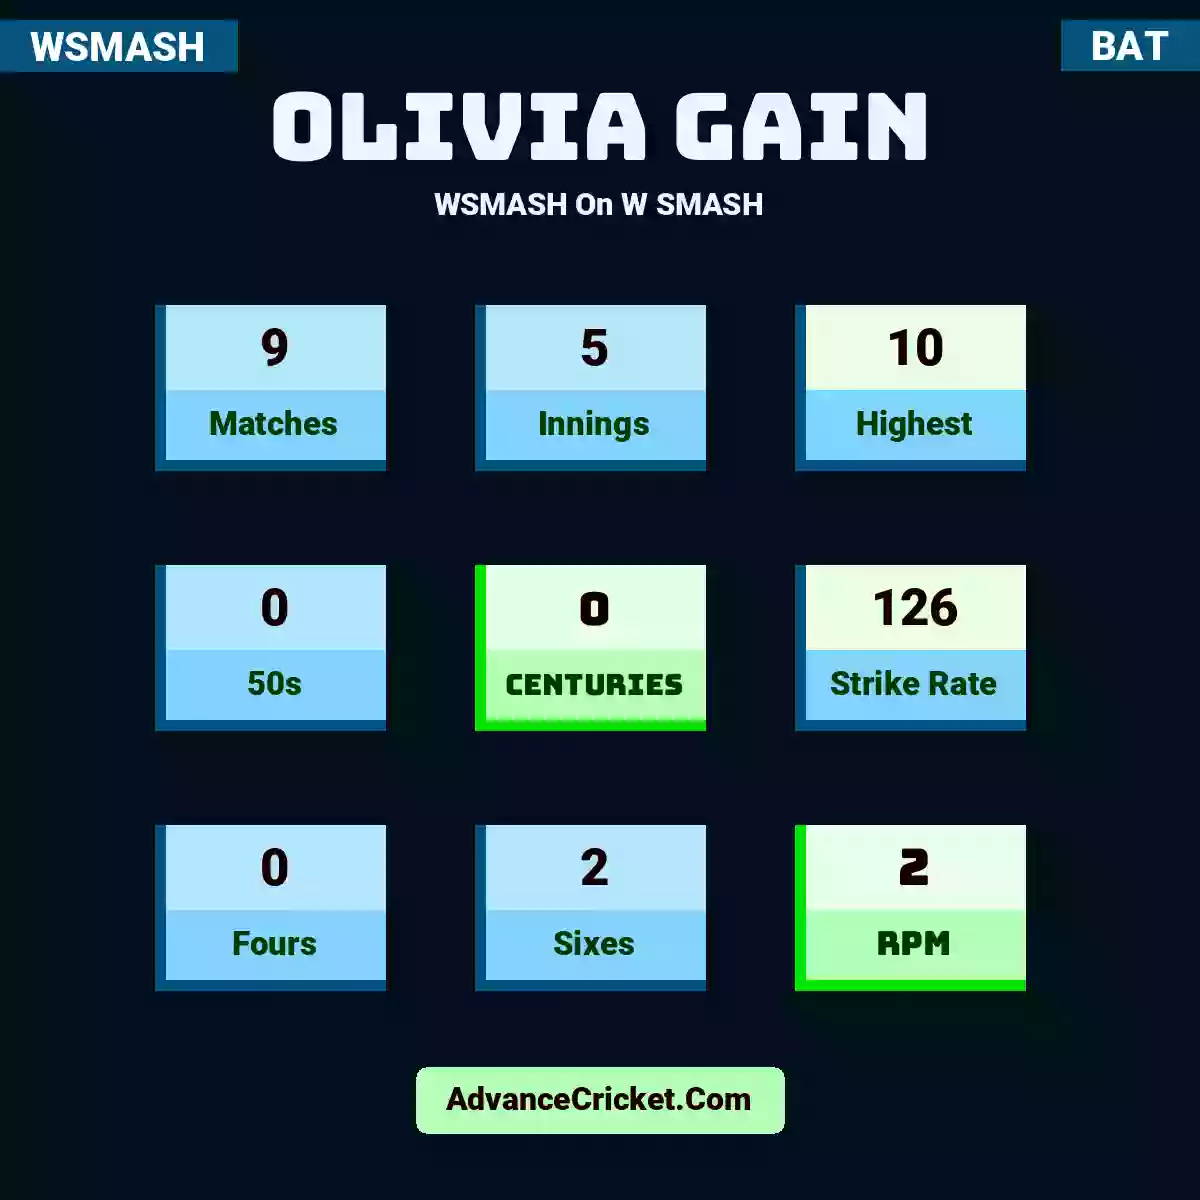 Olivia Gain WSMASH  On W SMASH, Olivia Gain played 9 matches, scored 10 runs as highest, 0 half-centuries, and 0 centuries, with a strike rate of 126. O.Gain hit 0 fours and 2 sixes, with an RPM of 2.